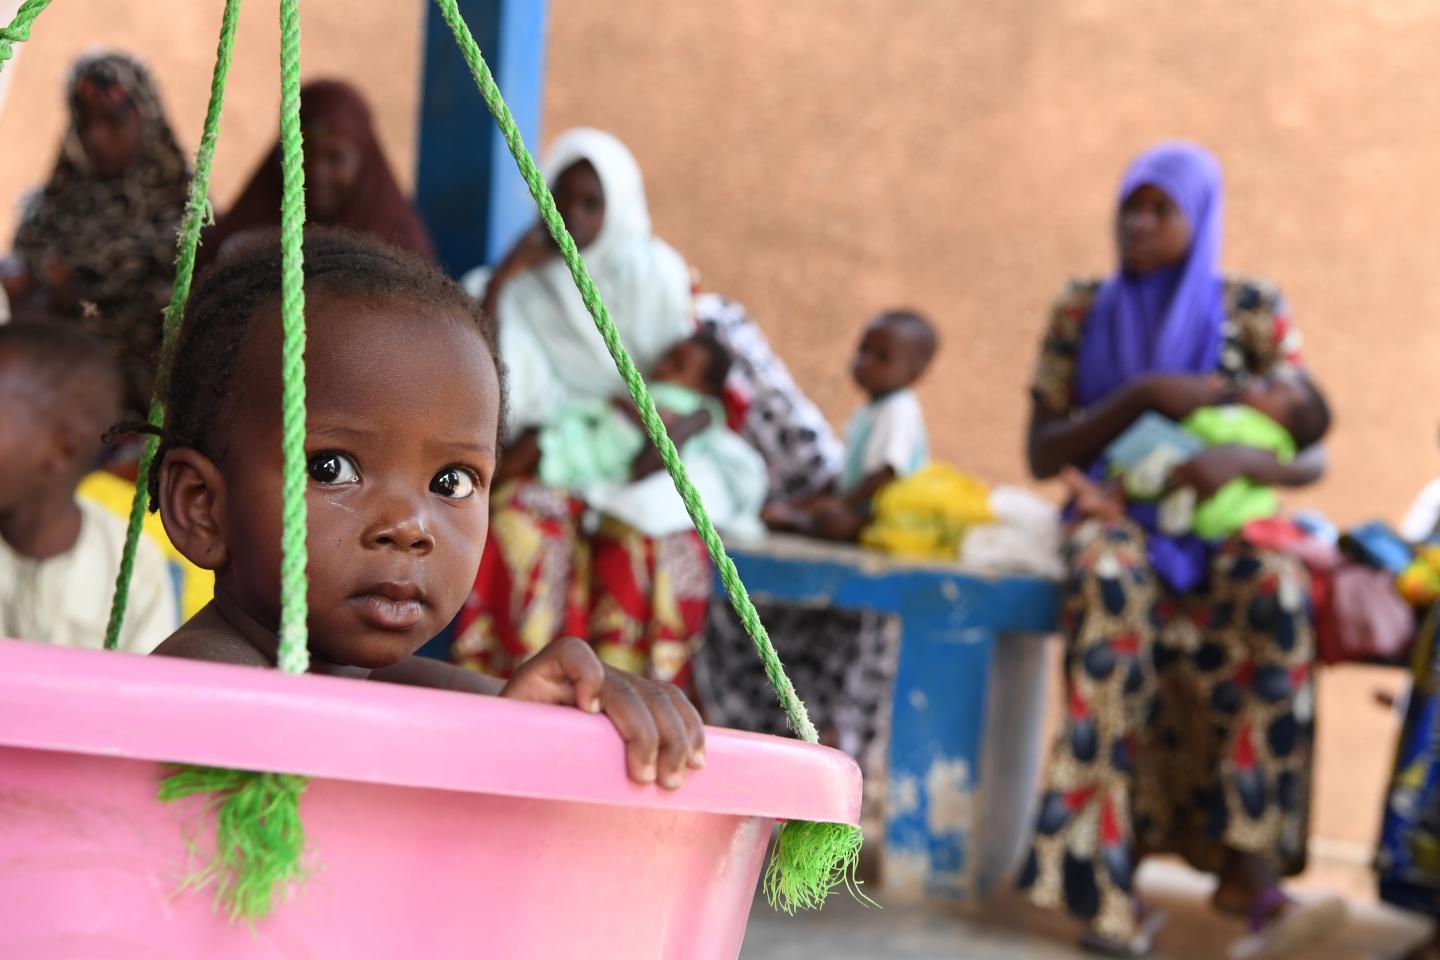 UN agencies raise alarm in the Central Sahel where millions face hunger amid rapidly escalating humanitarian crisis - UNICEF